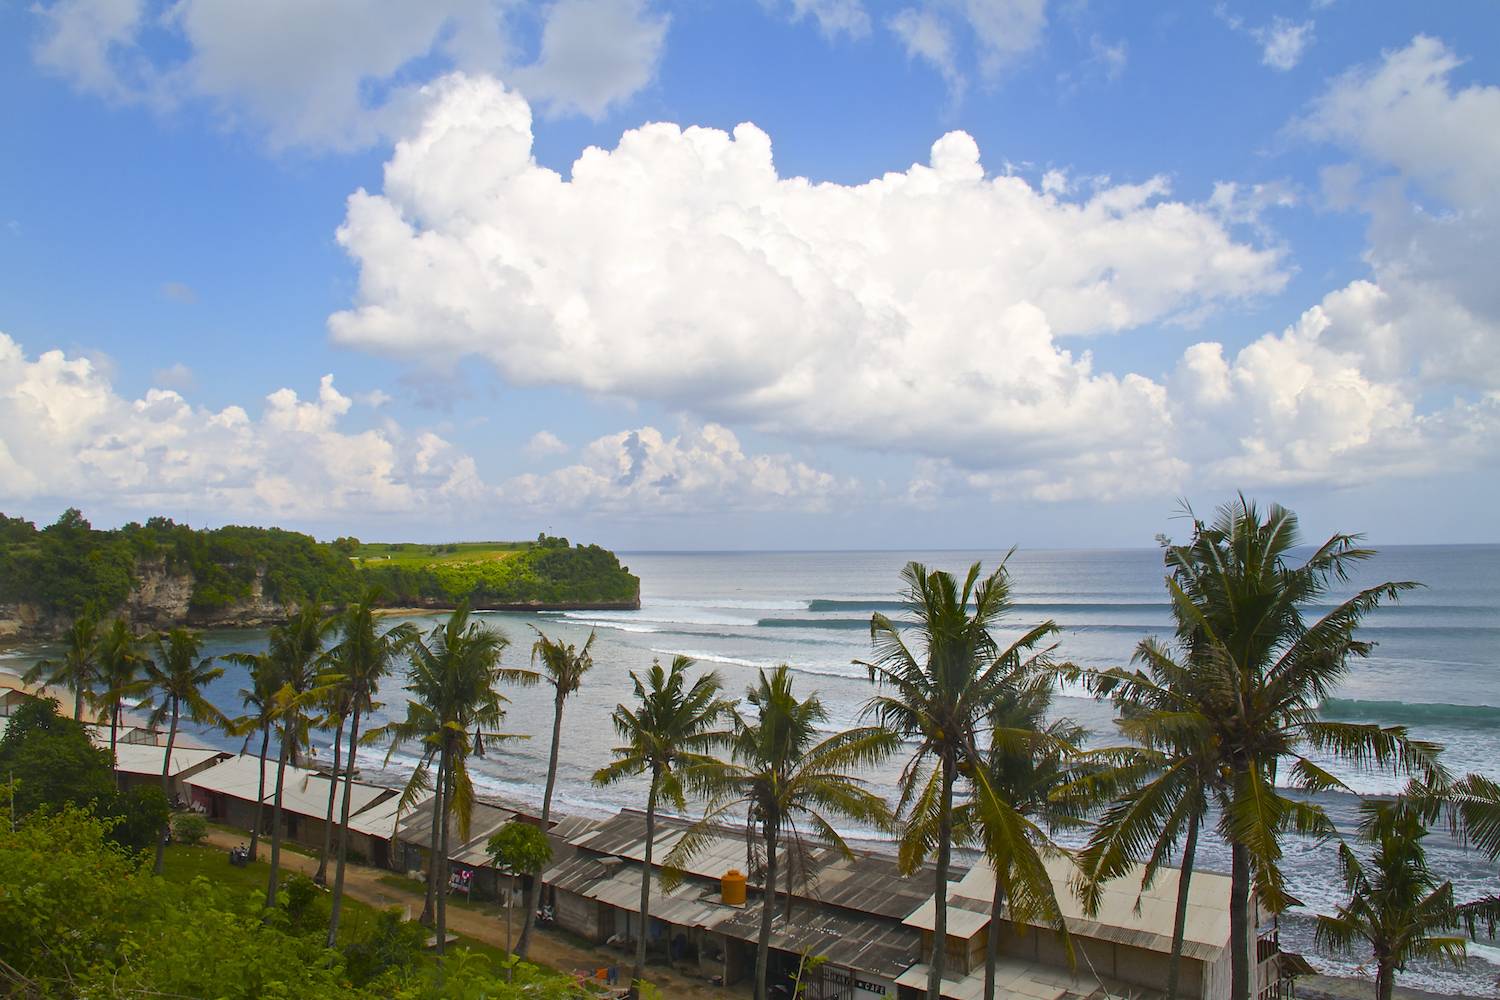 5 Beginners Surf Camp in Bali For A Life-Changing Surf Holiday » Indo